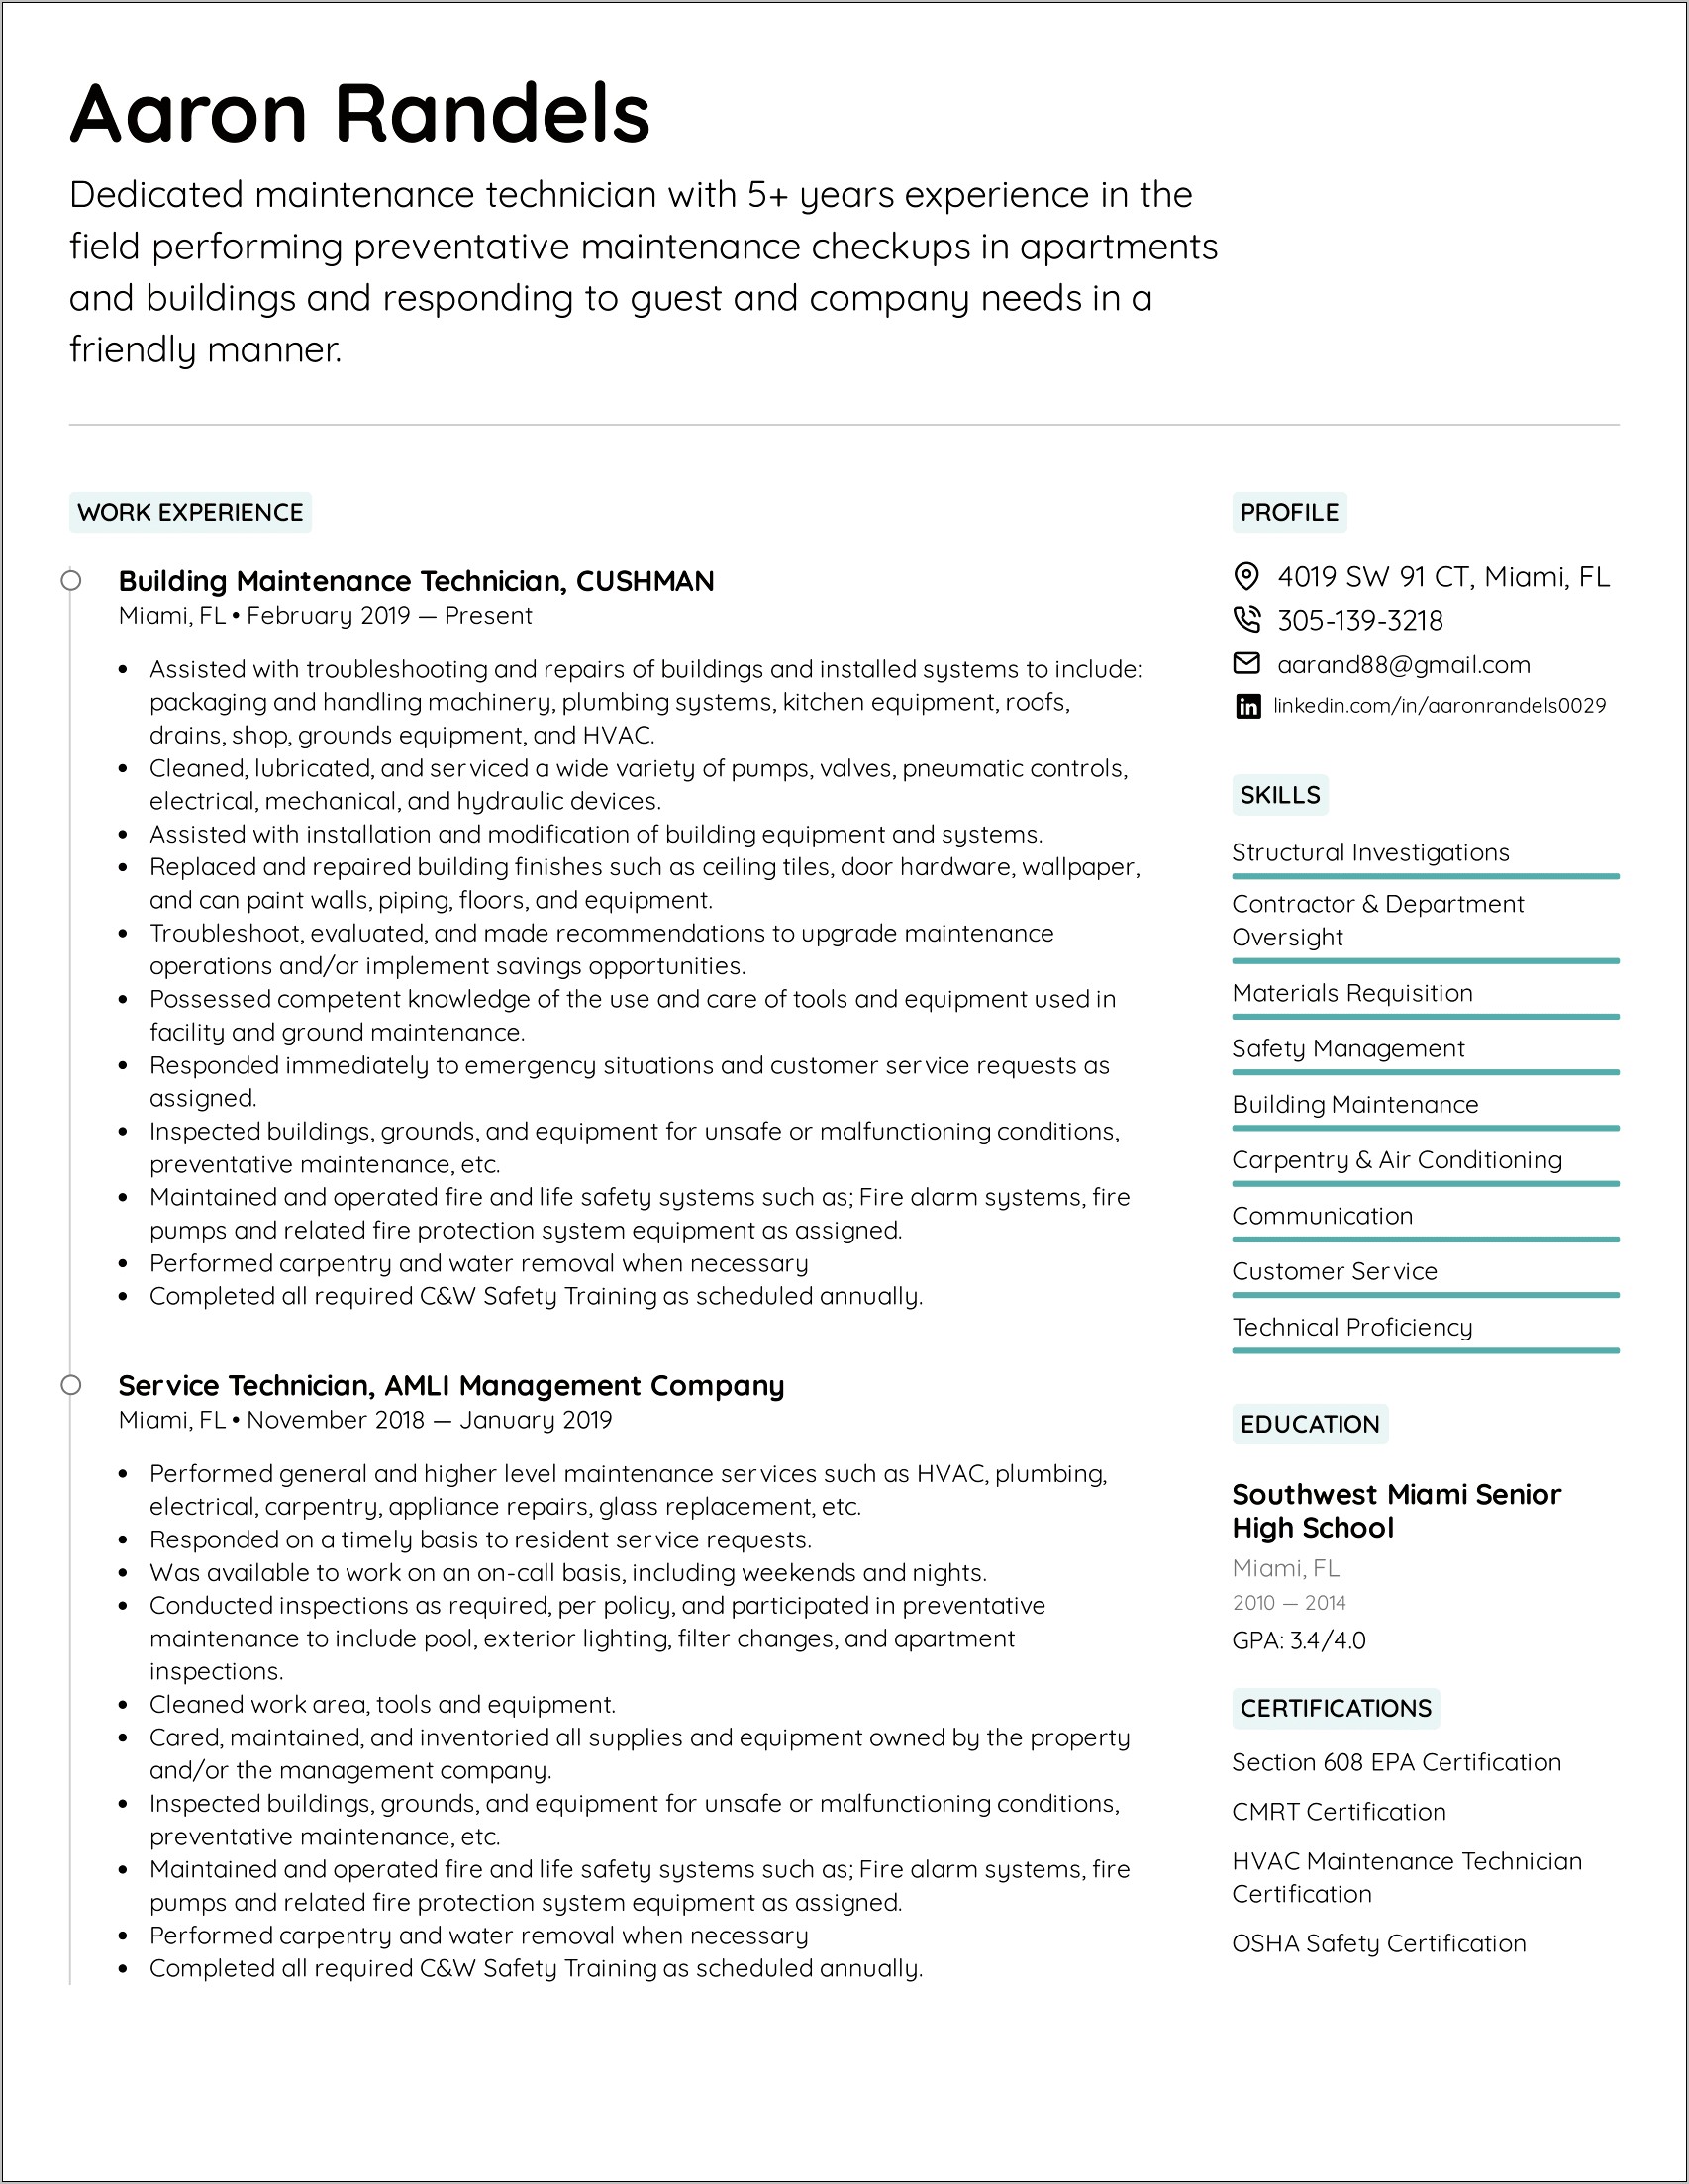 Armed Service Technician Resume Examples